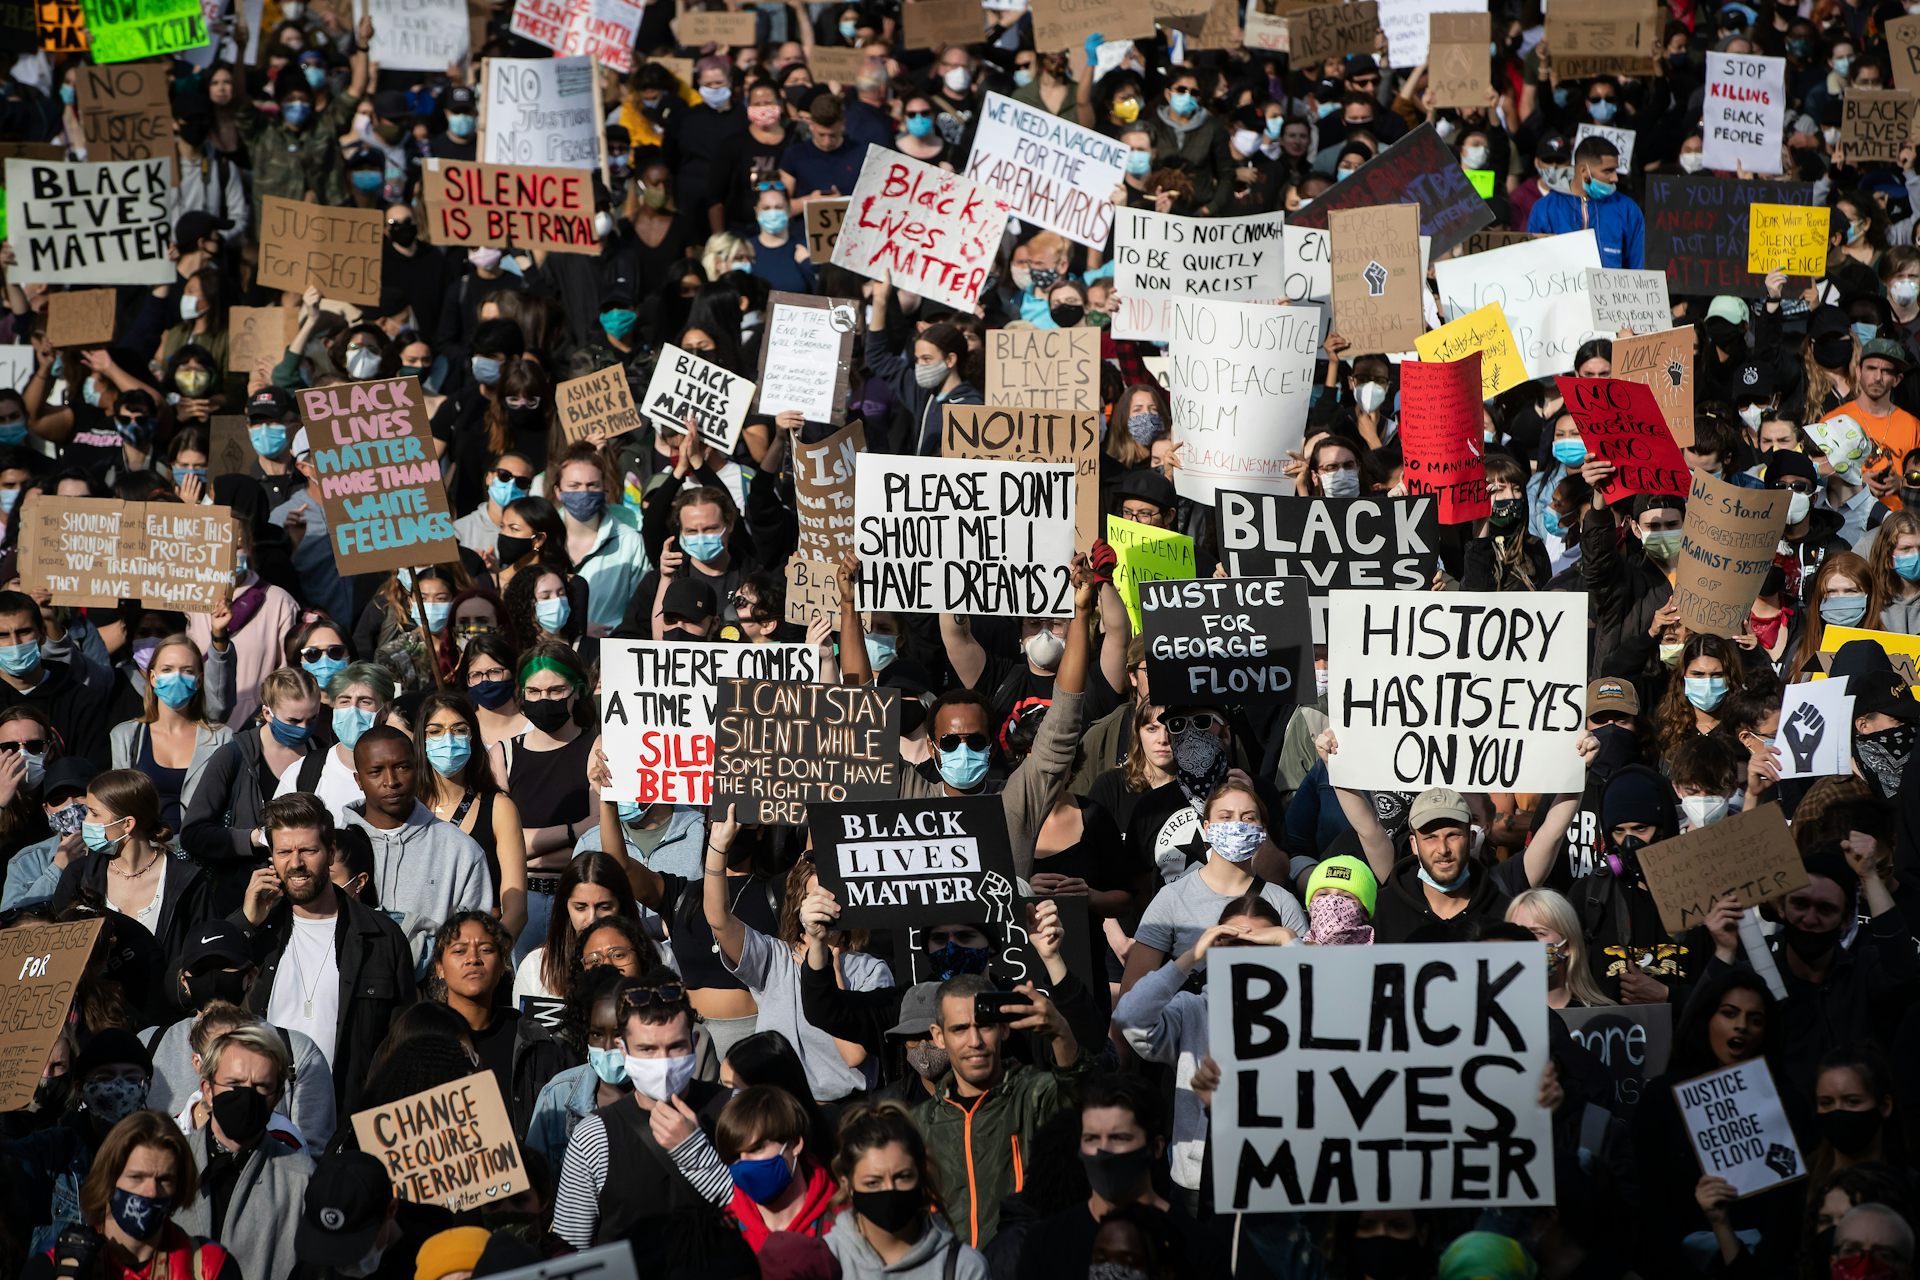 Despite loud calls to address anti-Black racism in Canada, most politicians have failed to do so. Here people gather for a peaceful demonstration to protest police brutality, in Vancouver, May 2020. THE CANADIAN PRESS/Darryl Dyck